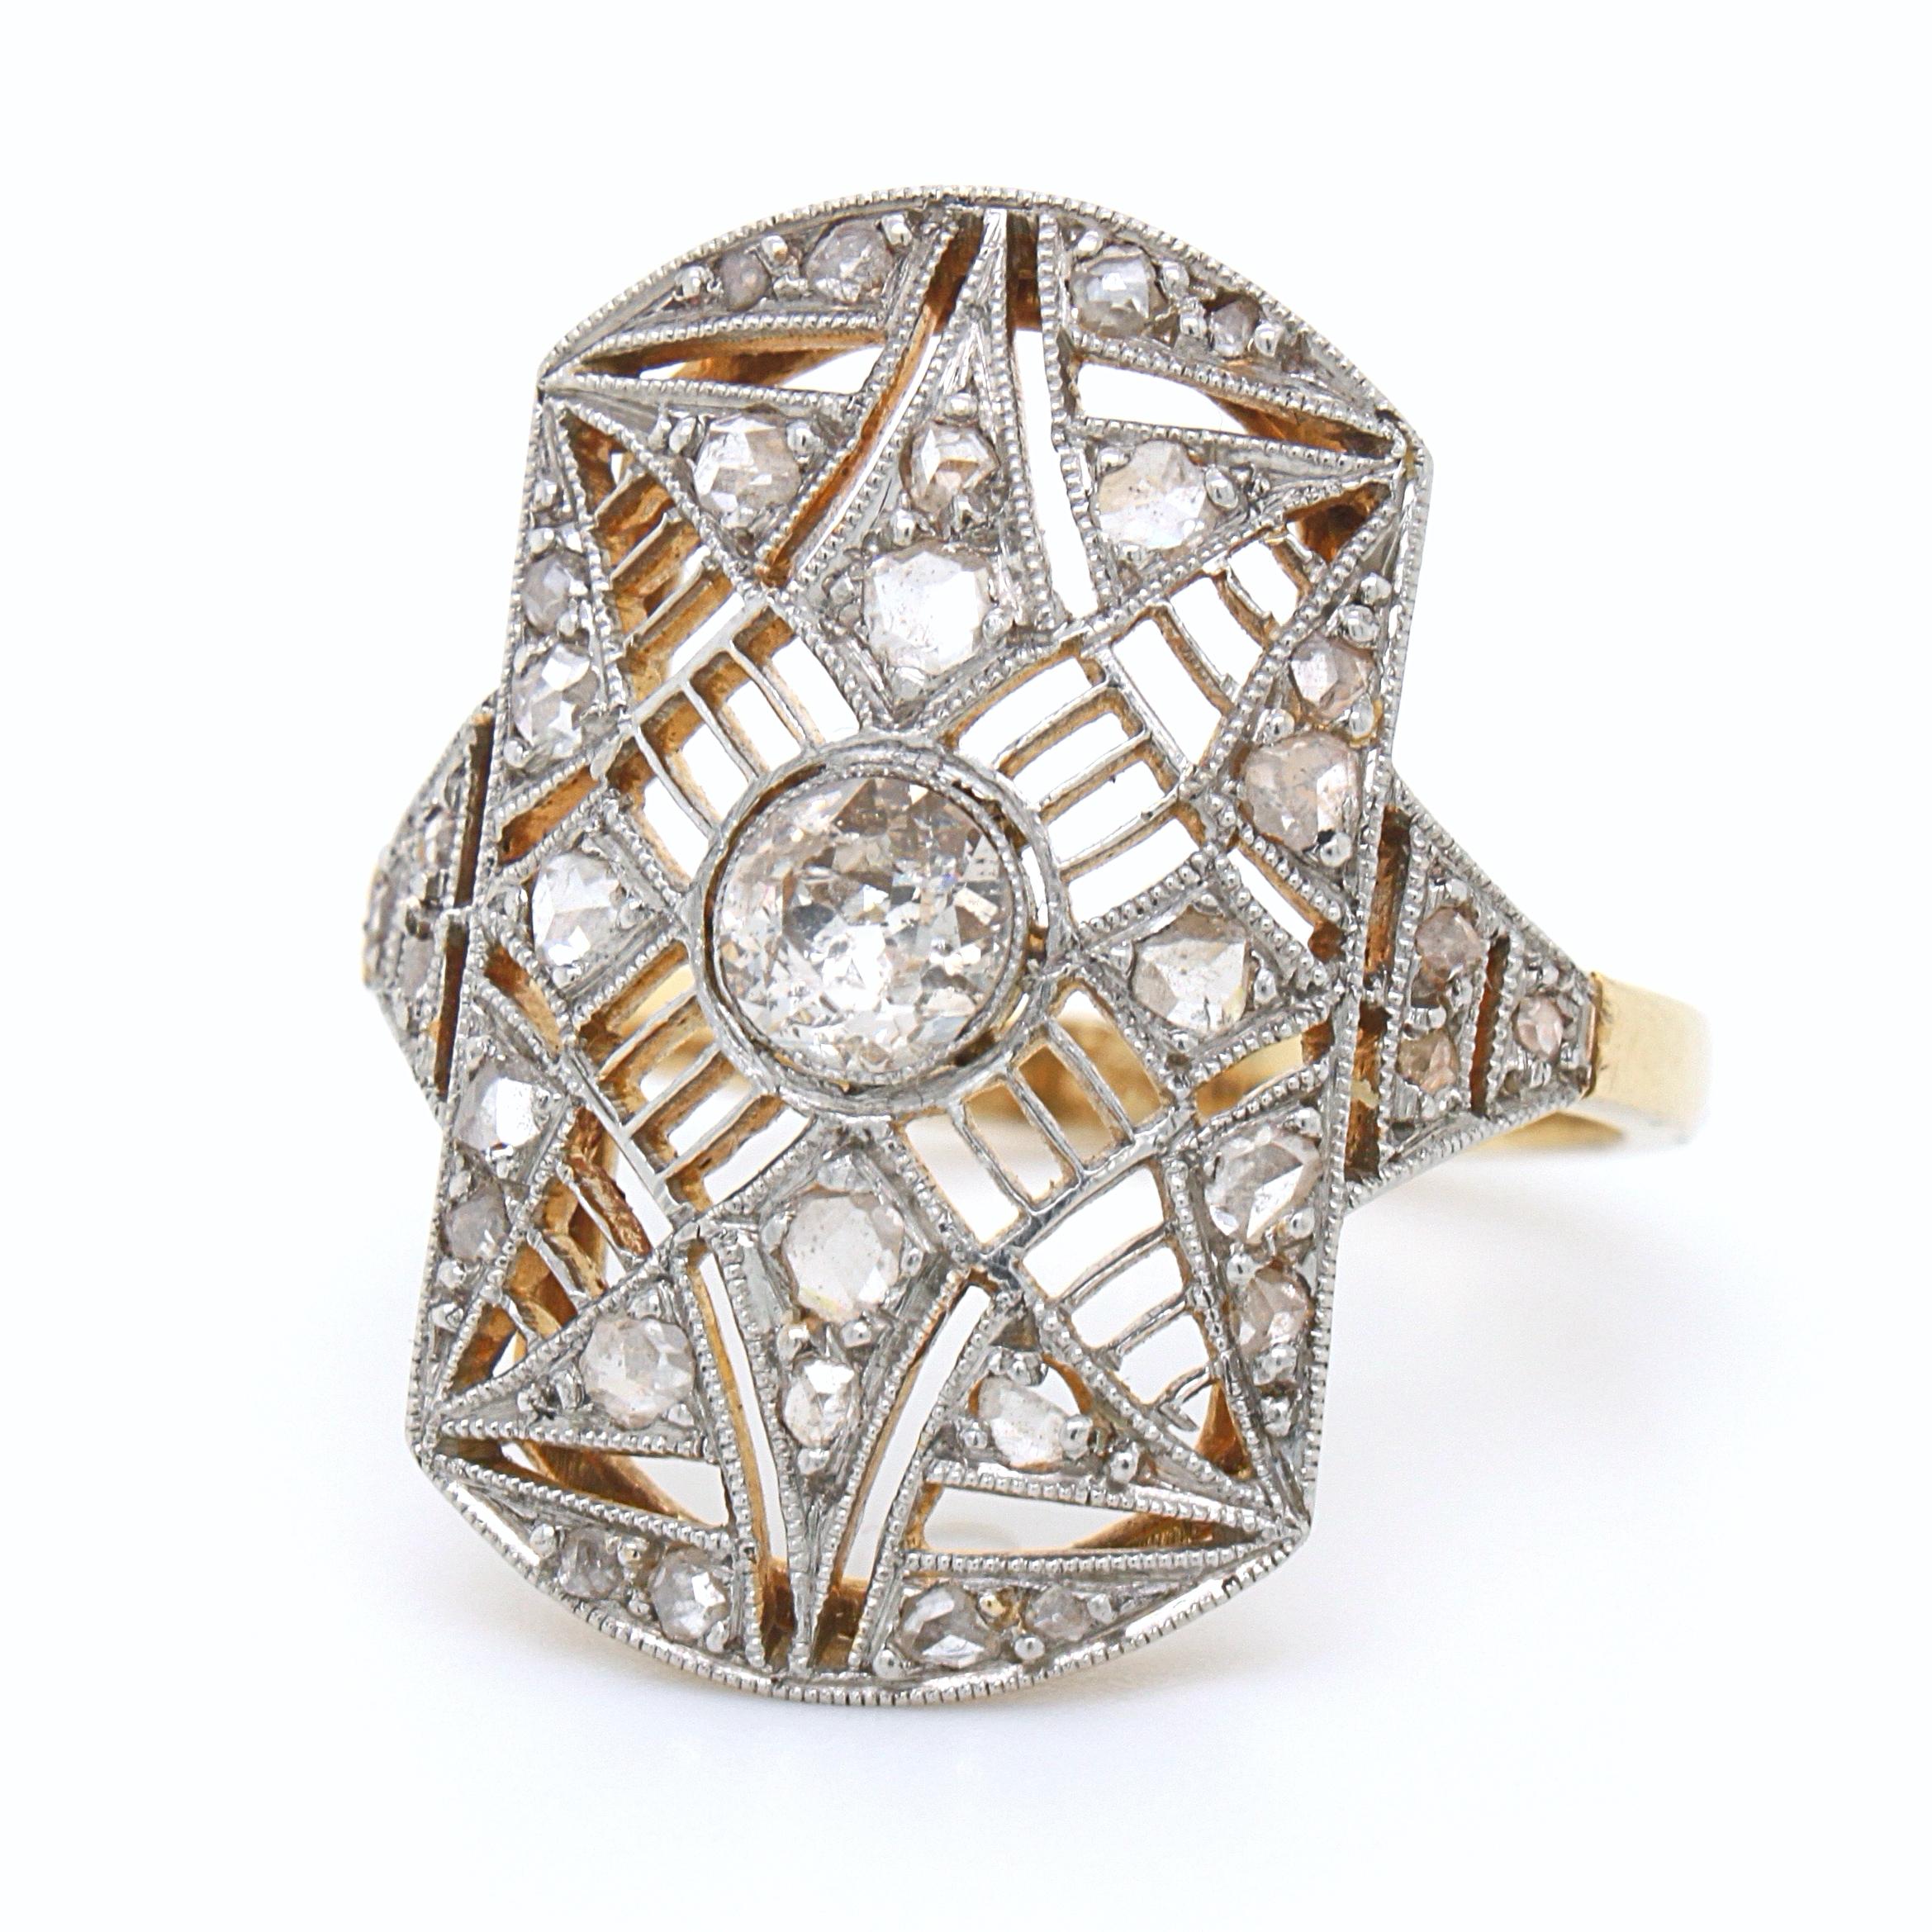 An old European cut and rose cut diamond ring in yellow gold and platinum, ca. 1890s. 

The ring is beautifully designed as a star emblem in a filigree milgrain platinum setting. The backside of the ring is in yellow gold. The ring is marked AS and